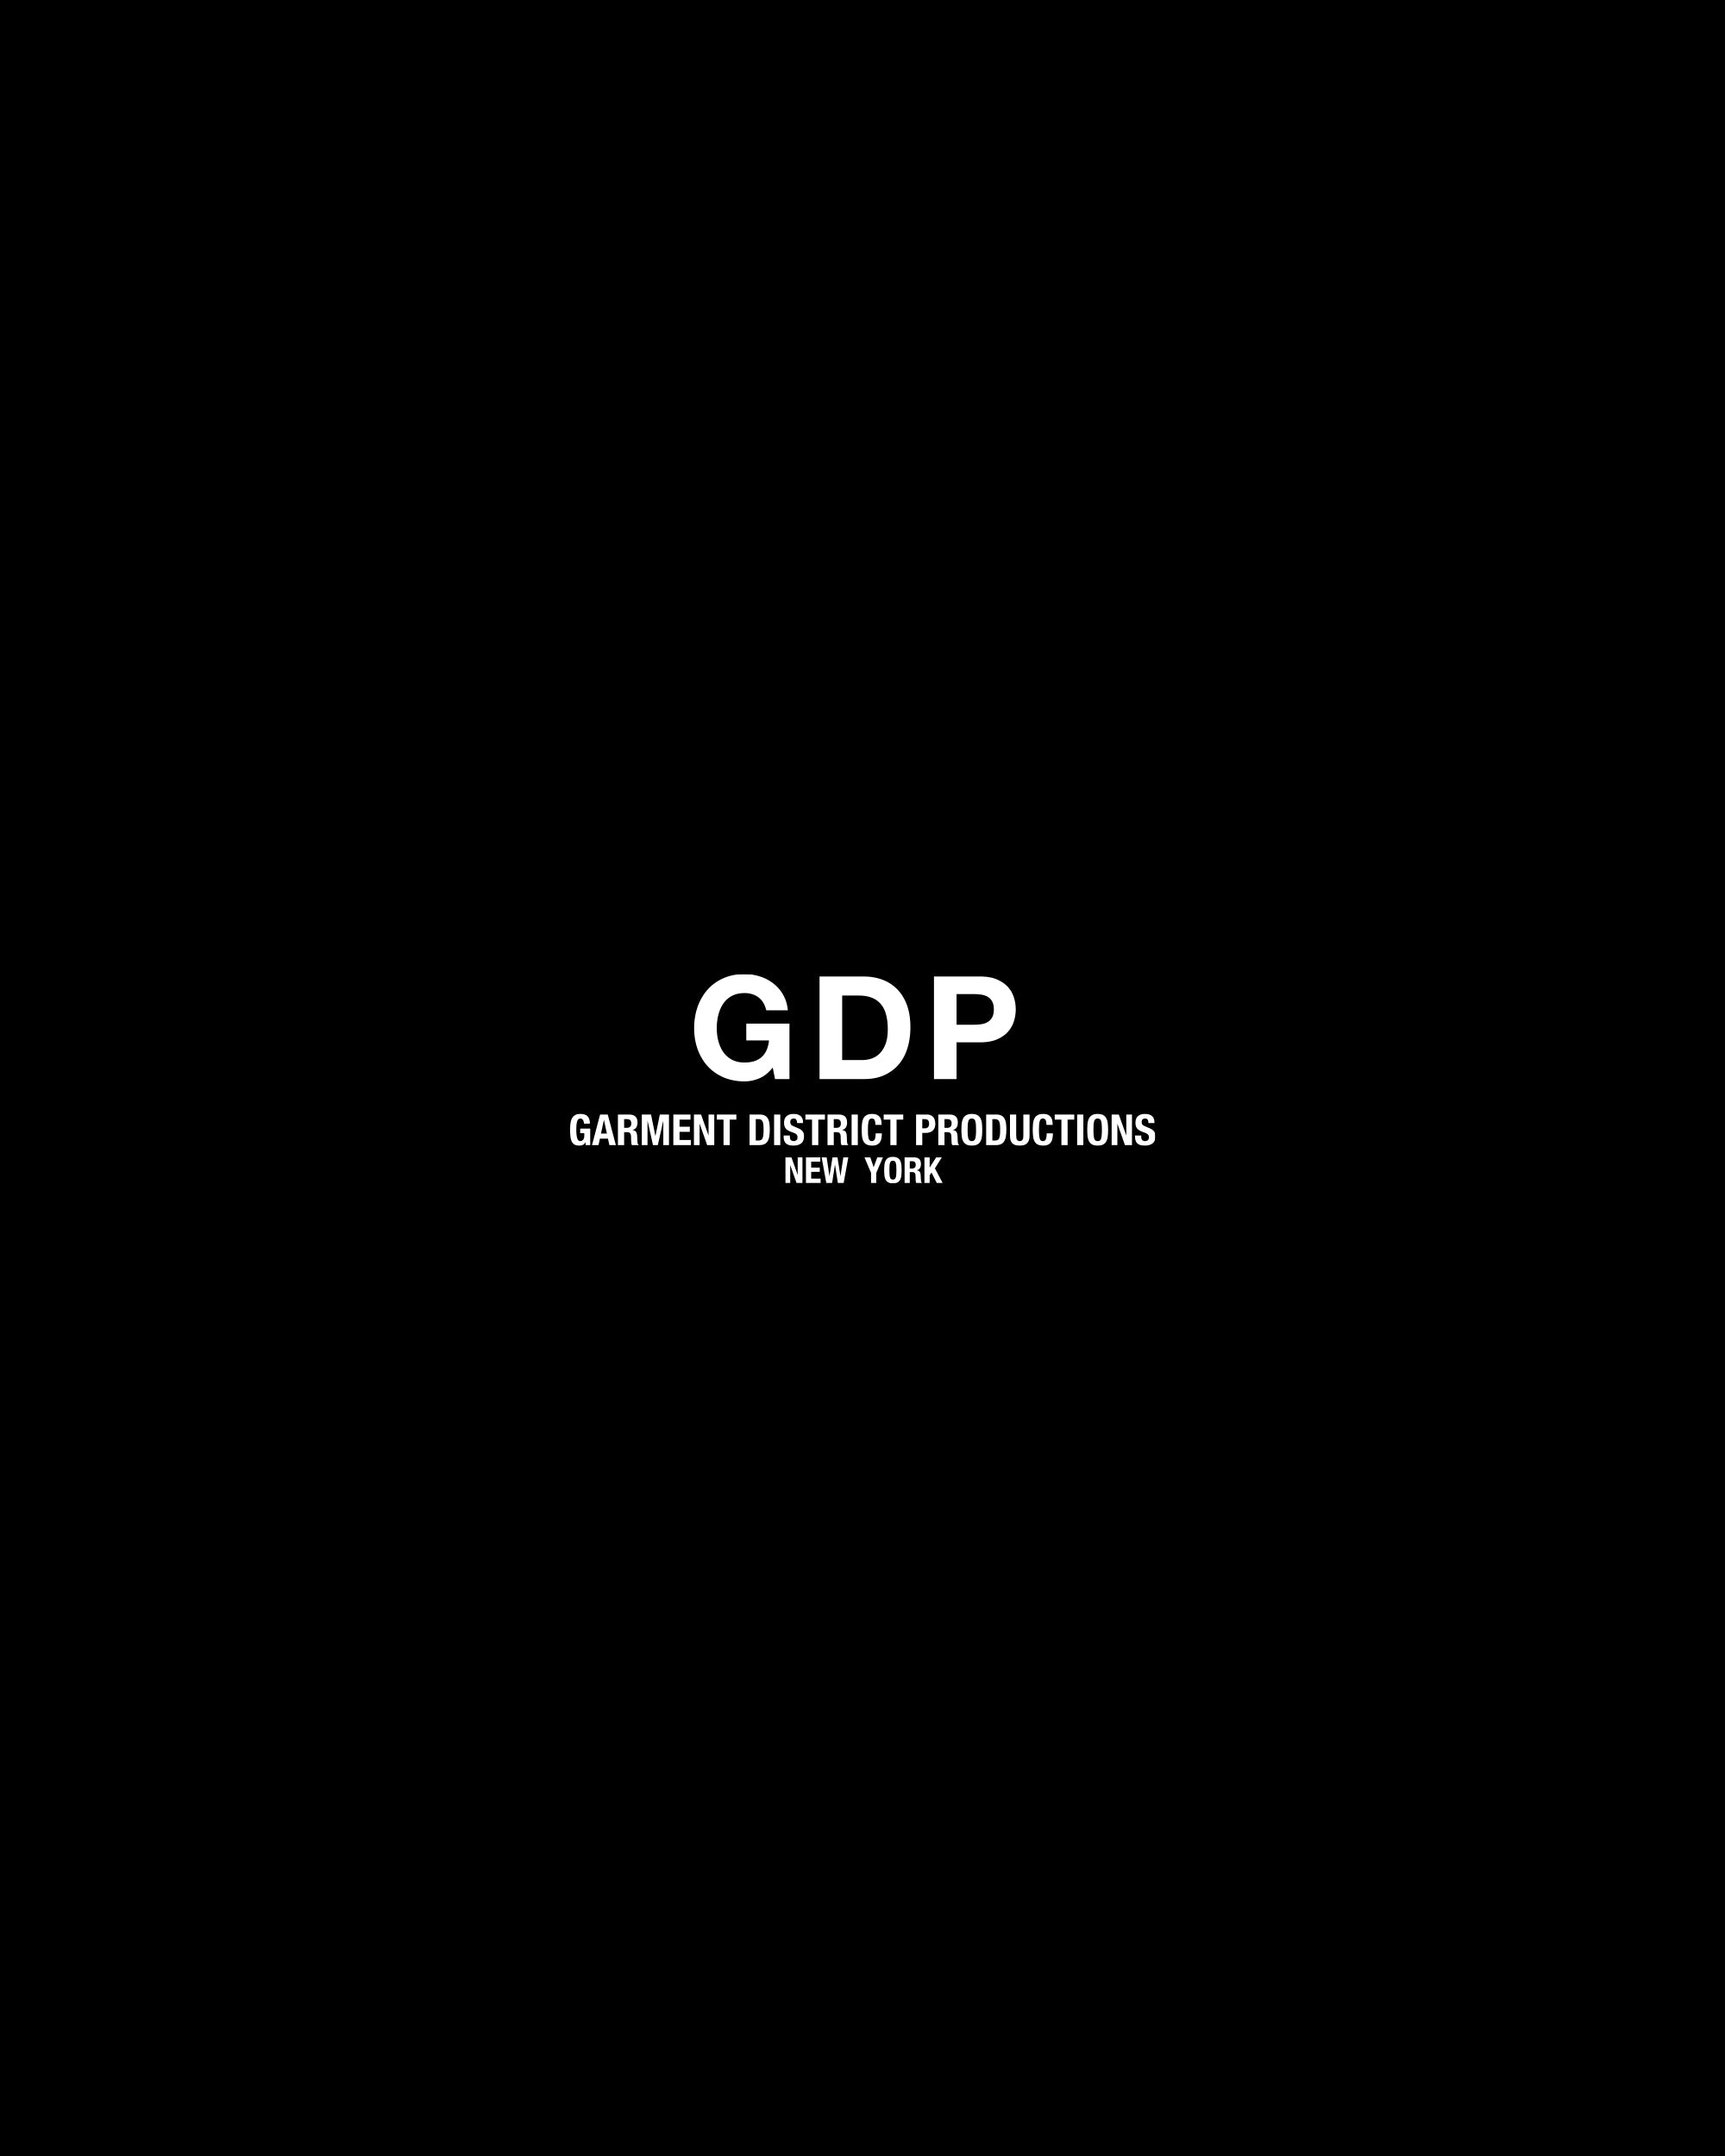 Garments District Productions (GDP) - First collection